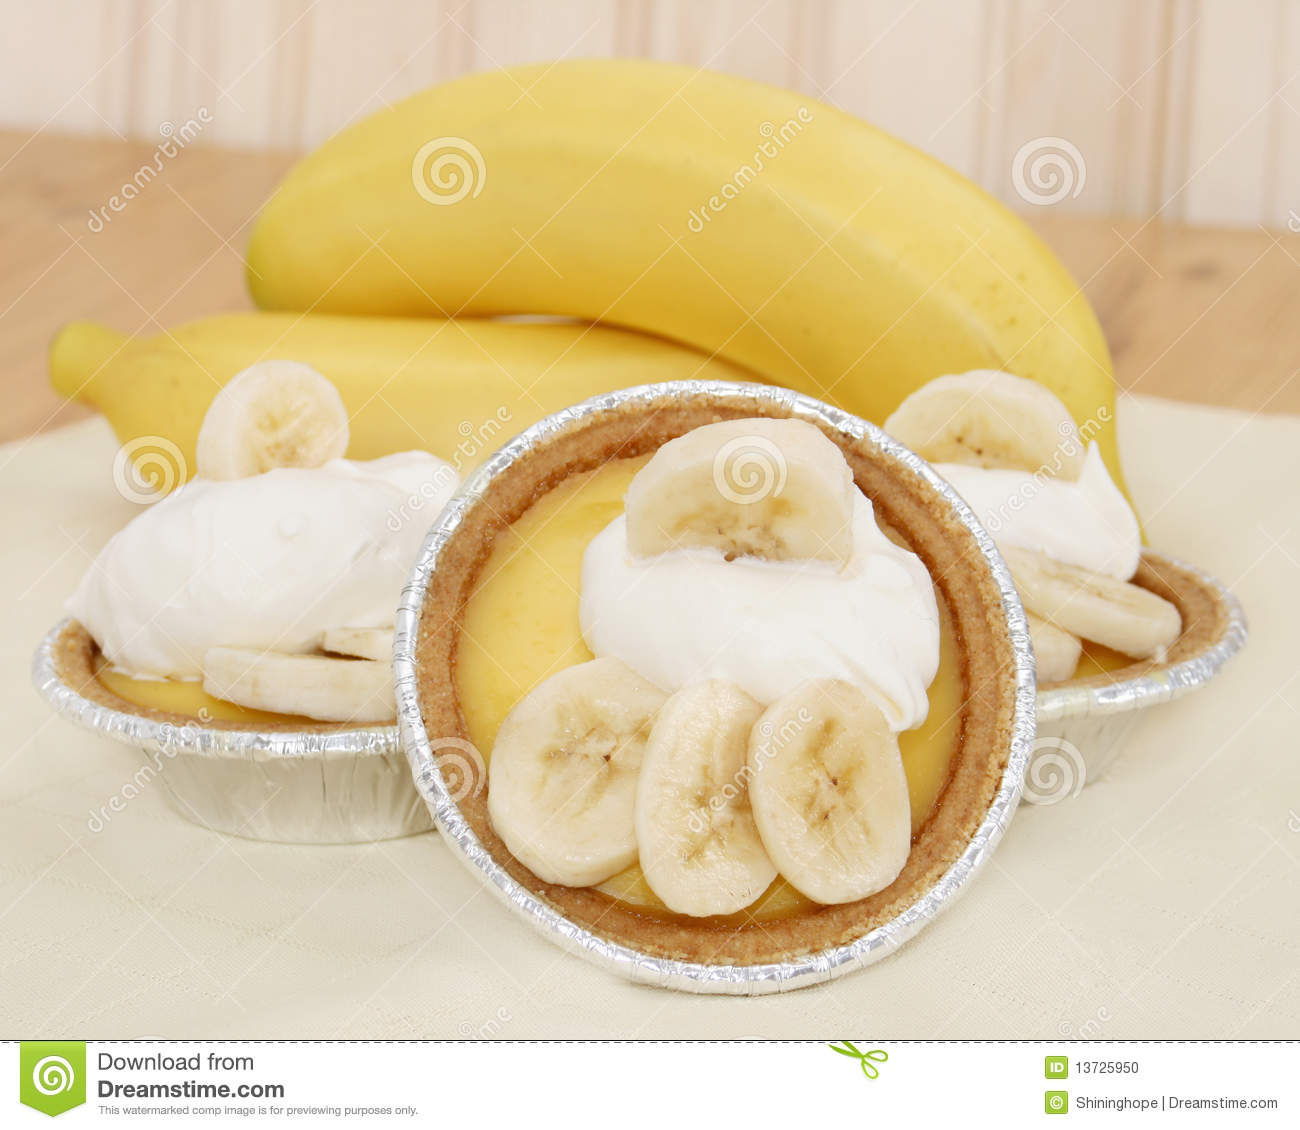 Three Mini Banana Pudding Pies With Banana Slices And Whipped Topping 